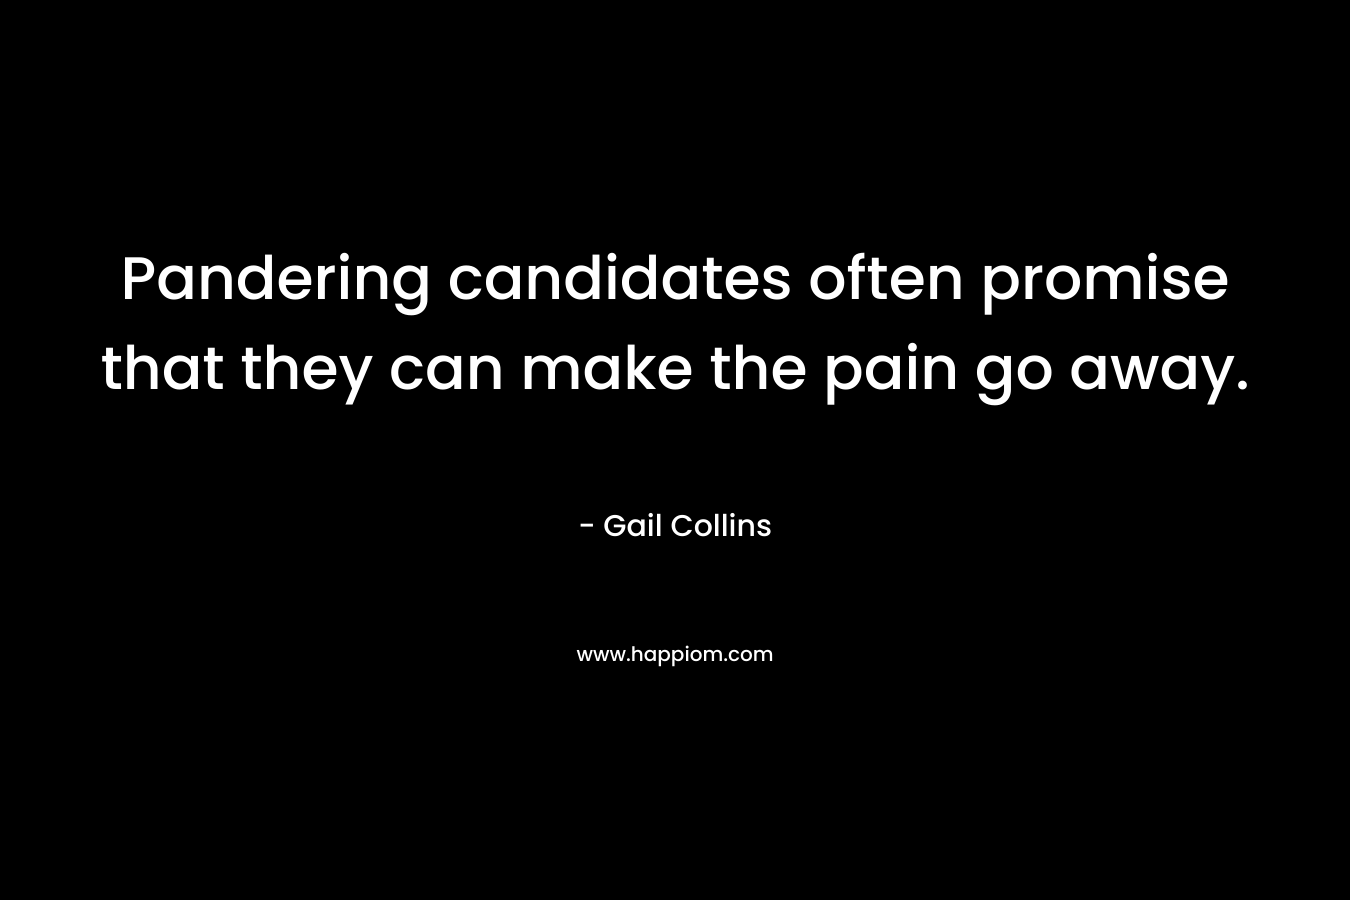 Pandering candidates often promise that they can make the pain go away. – Gail Collins